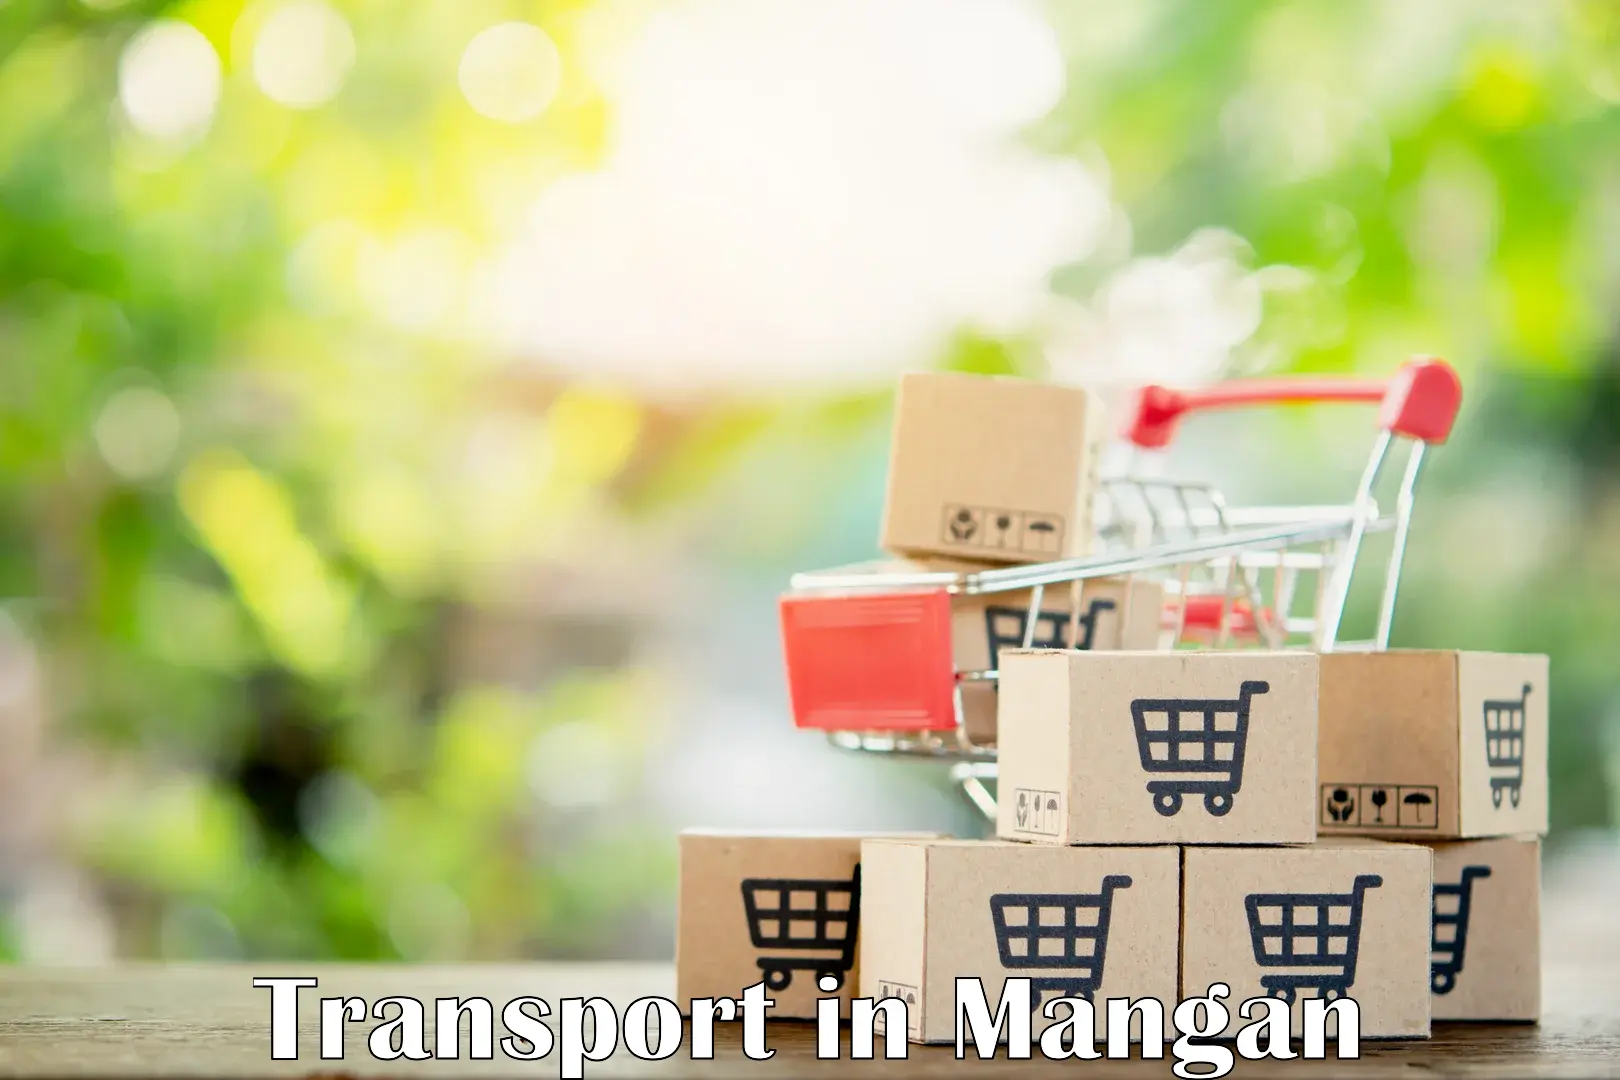 Transport shared services in Mangan